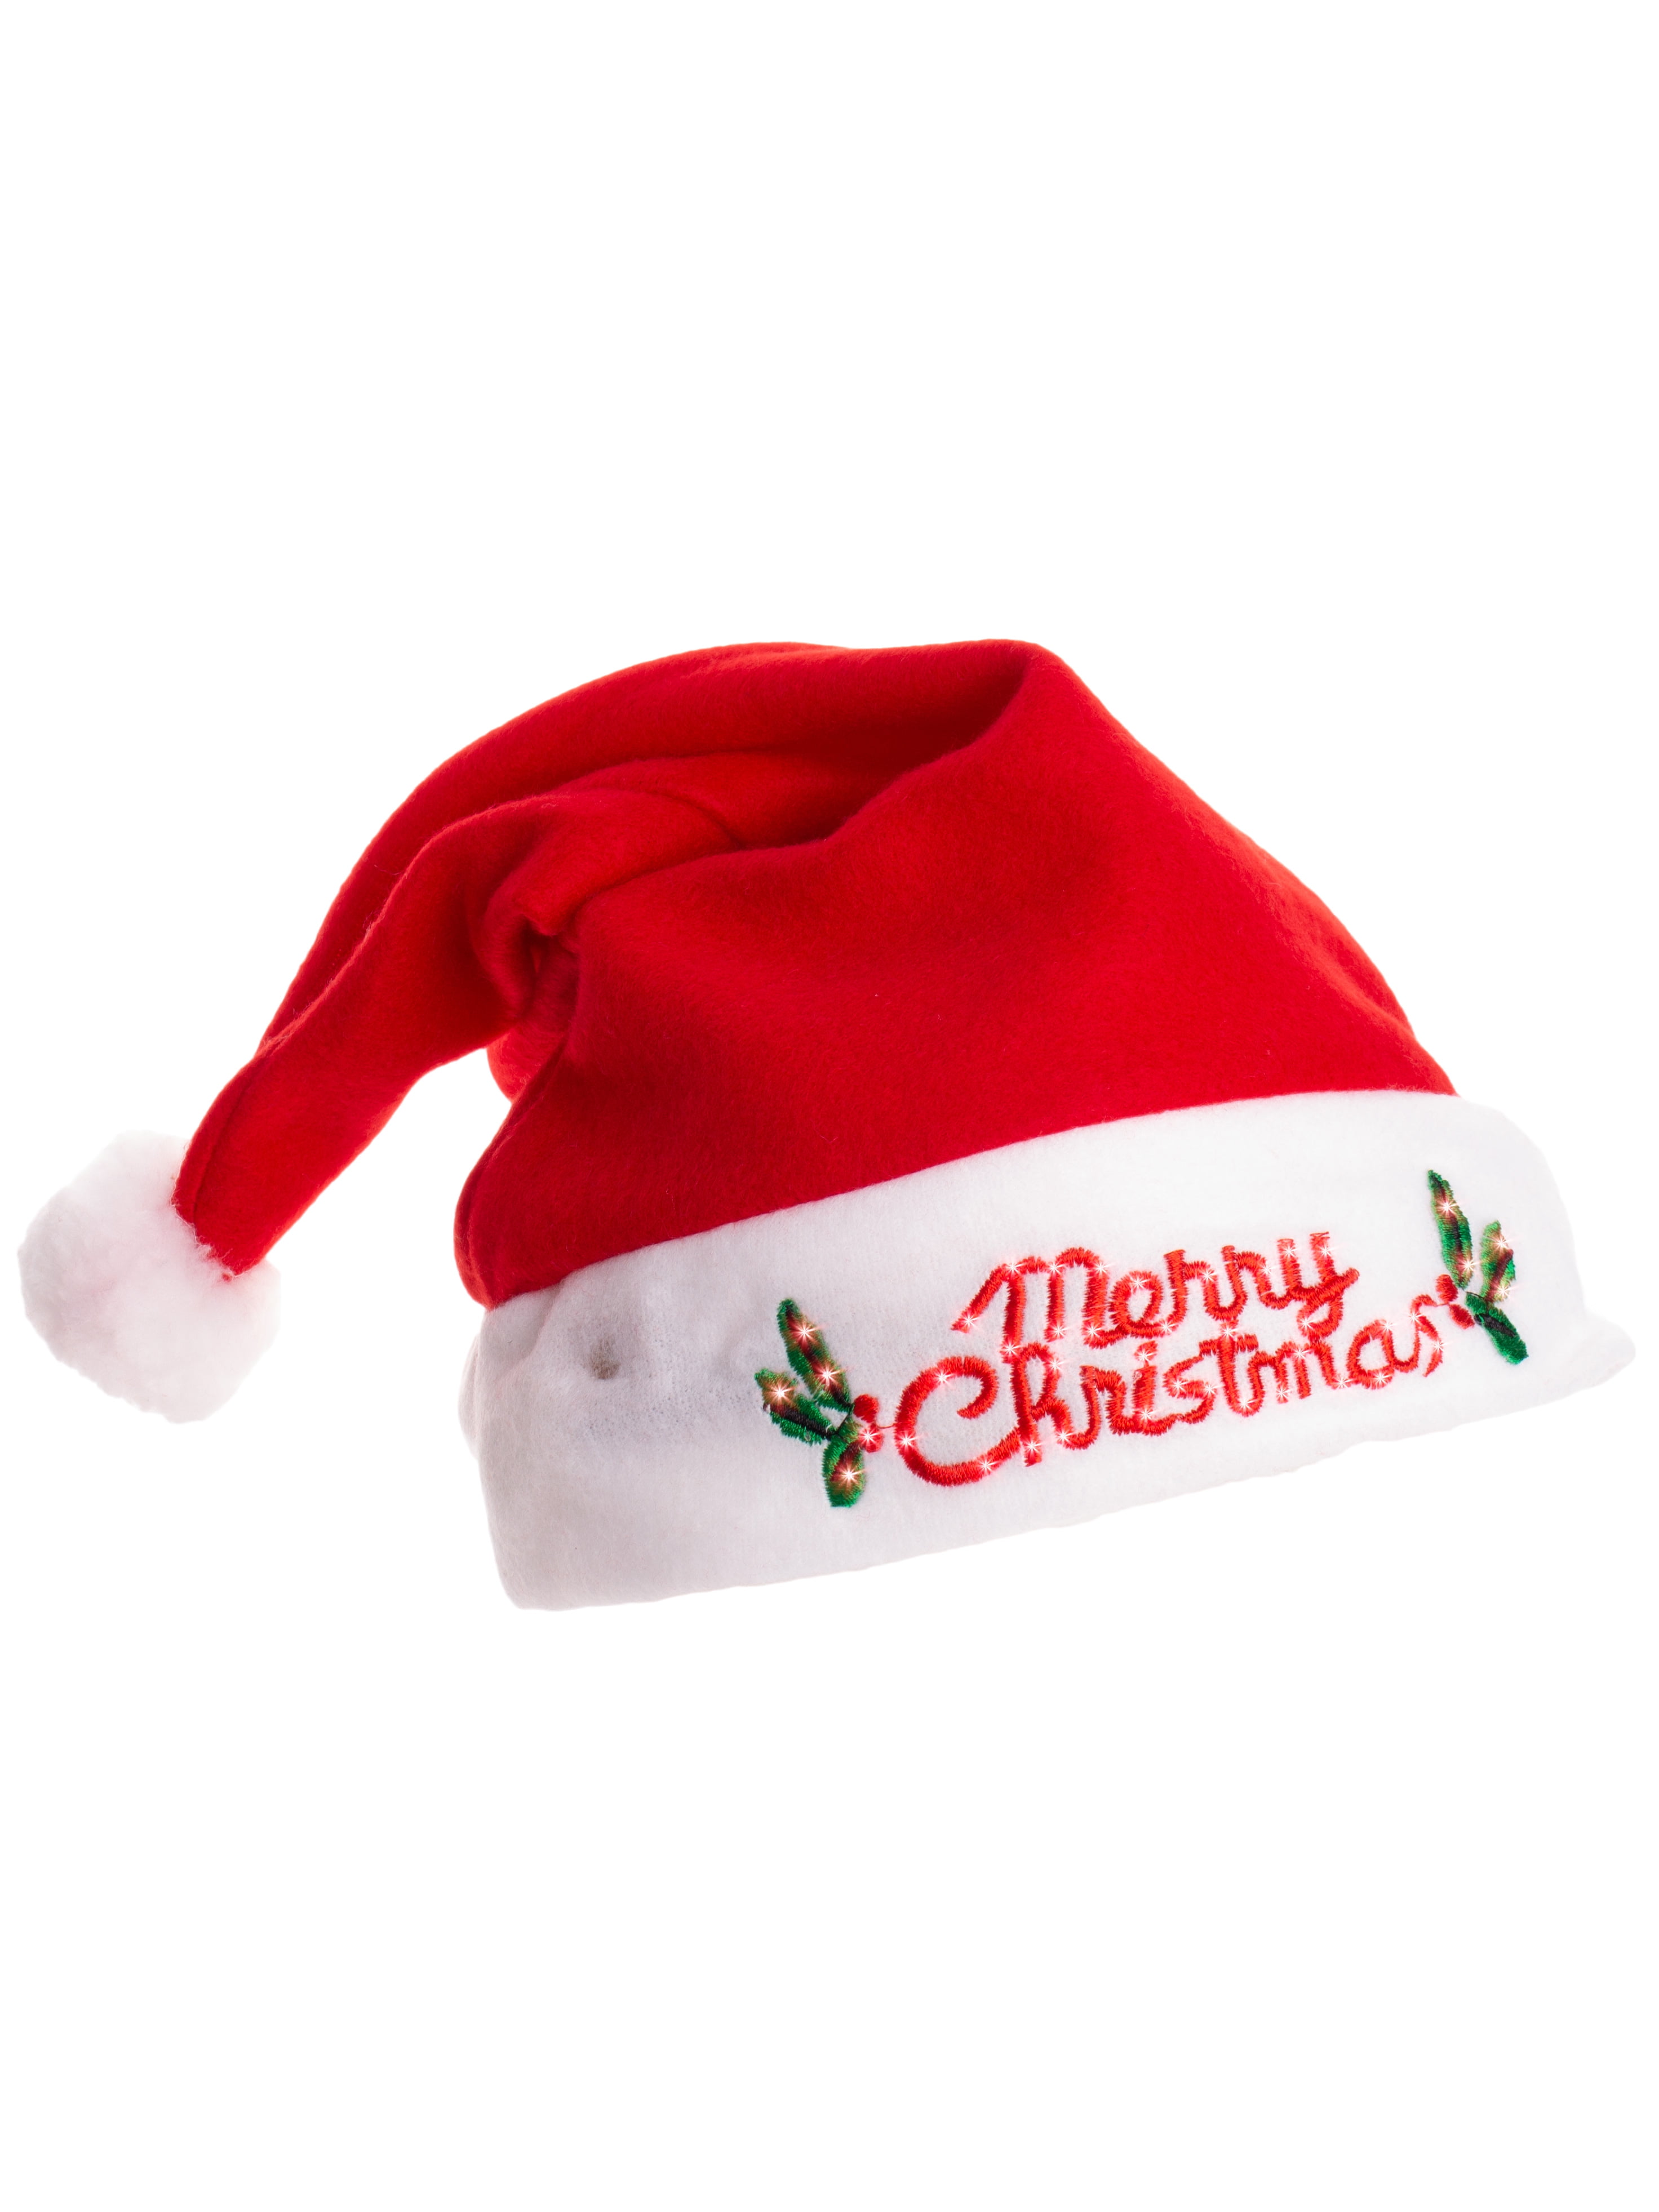 Light Up Christmas Hat T6M1 New Santa Hat with Flashing Lights Adult Size 